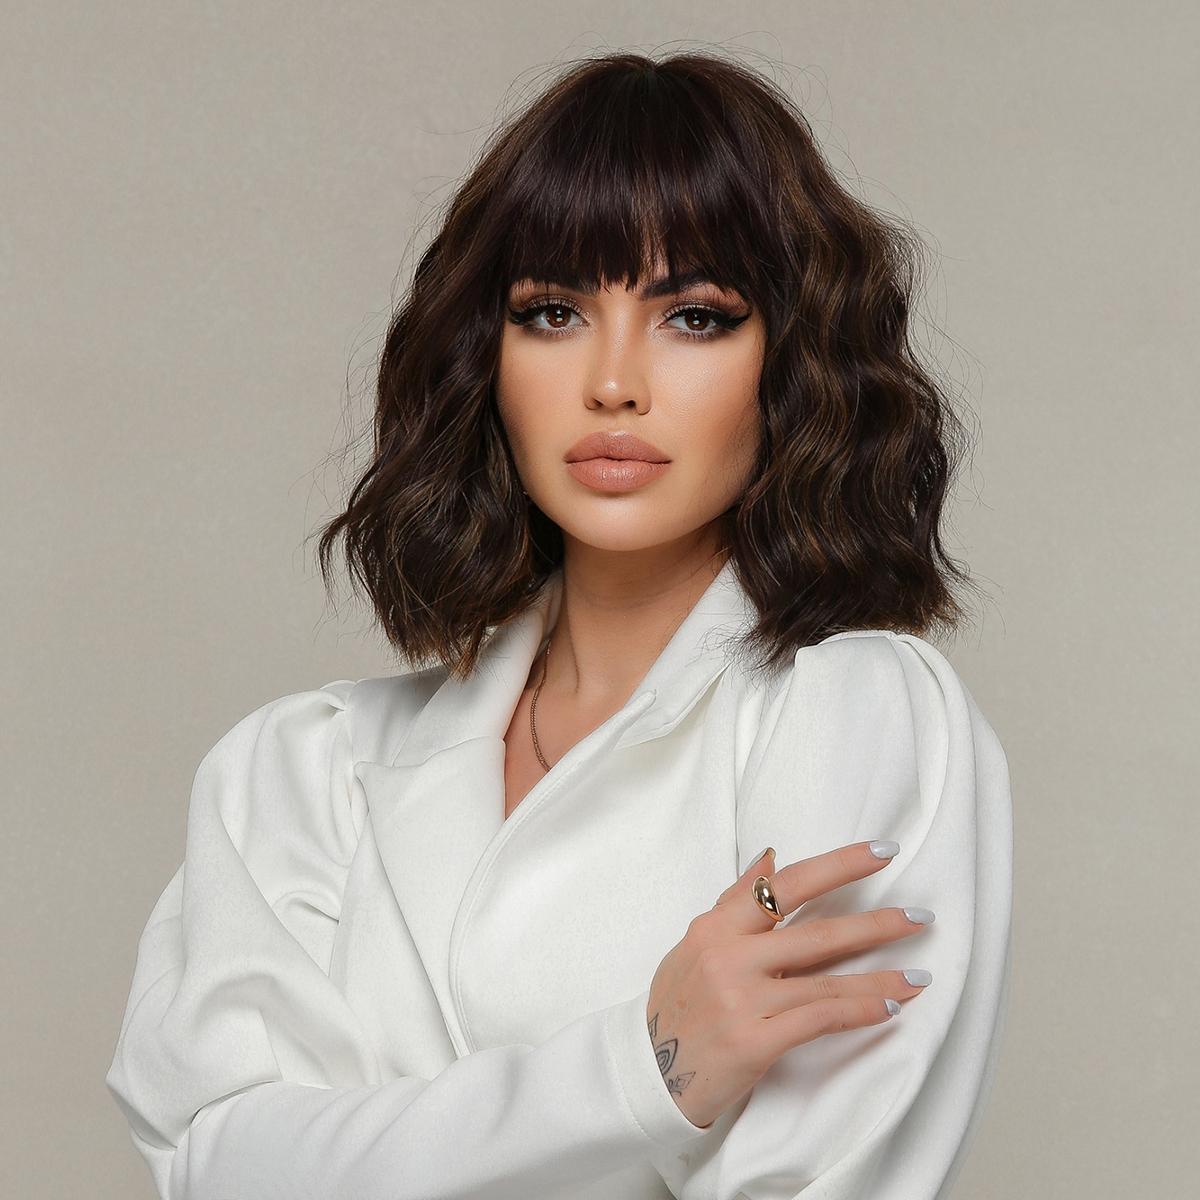 A fashionable dark brown wig with short curly synthetic hair, designed for easy styling and a ready-to-wear look. Free shipping